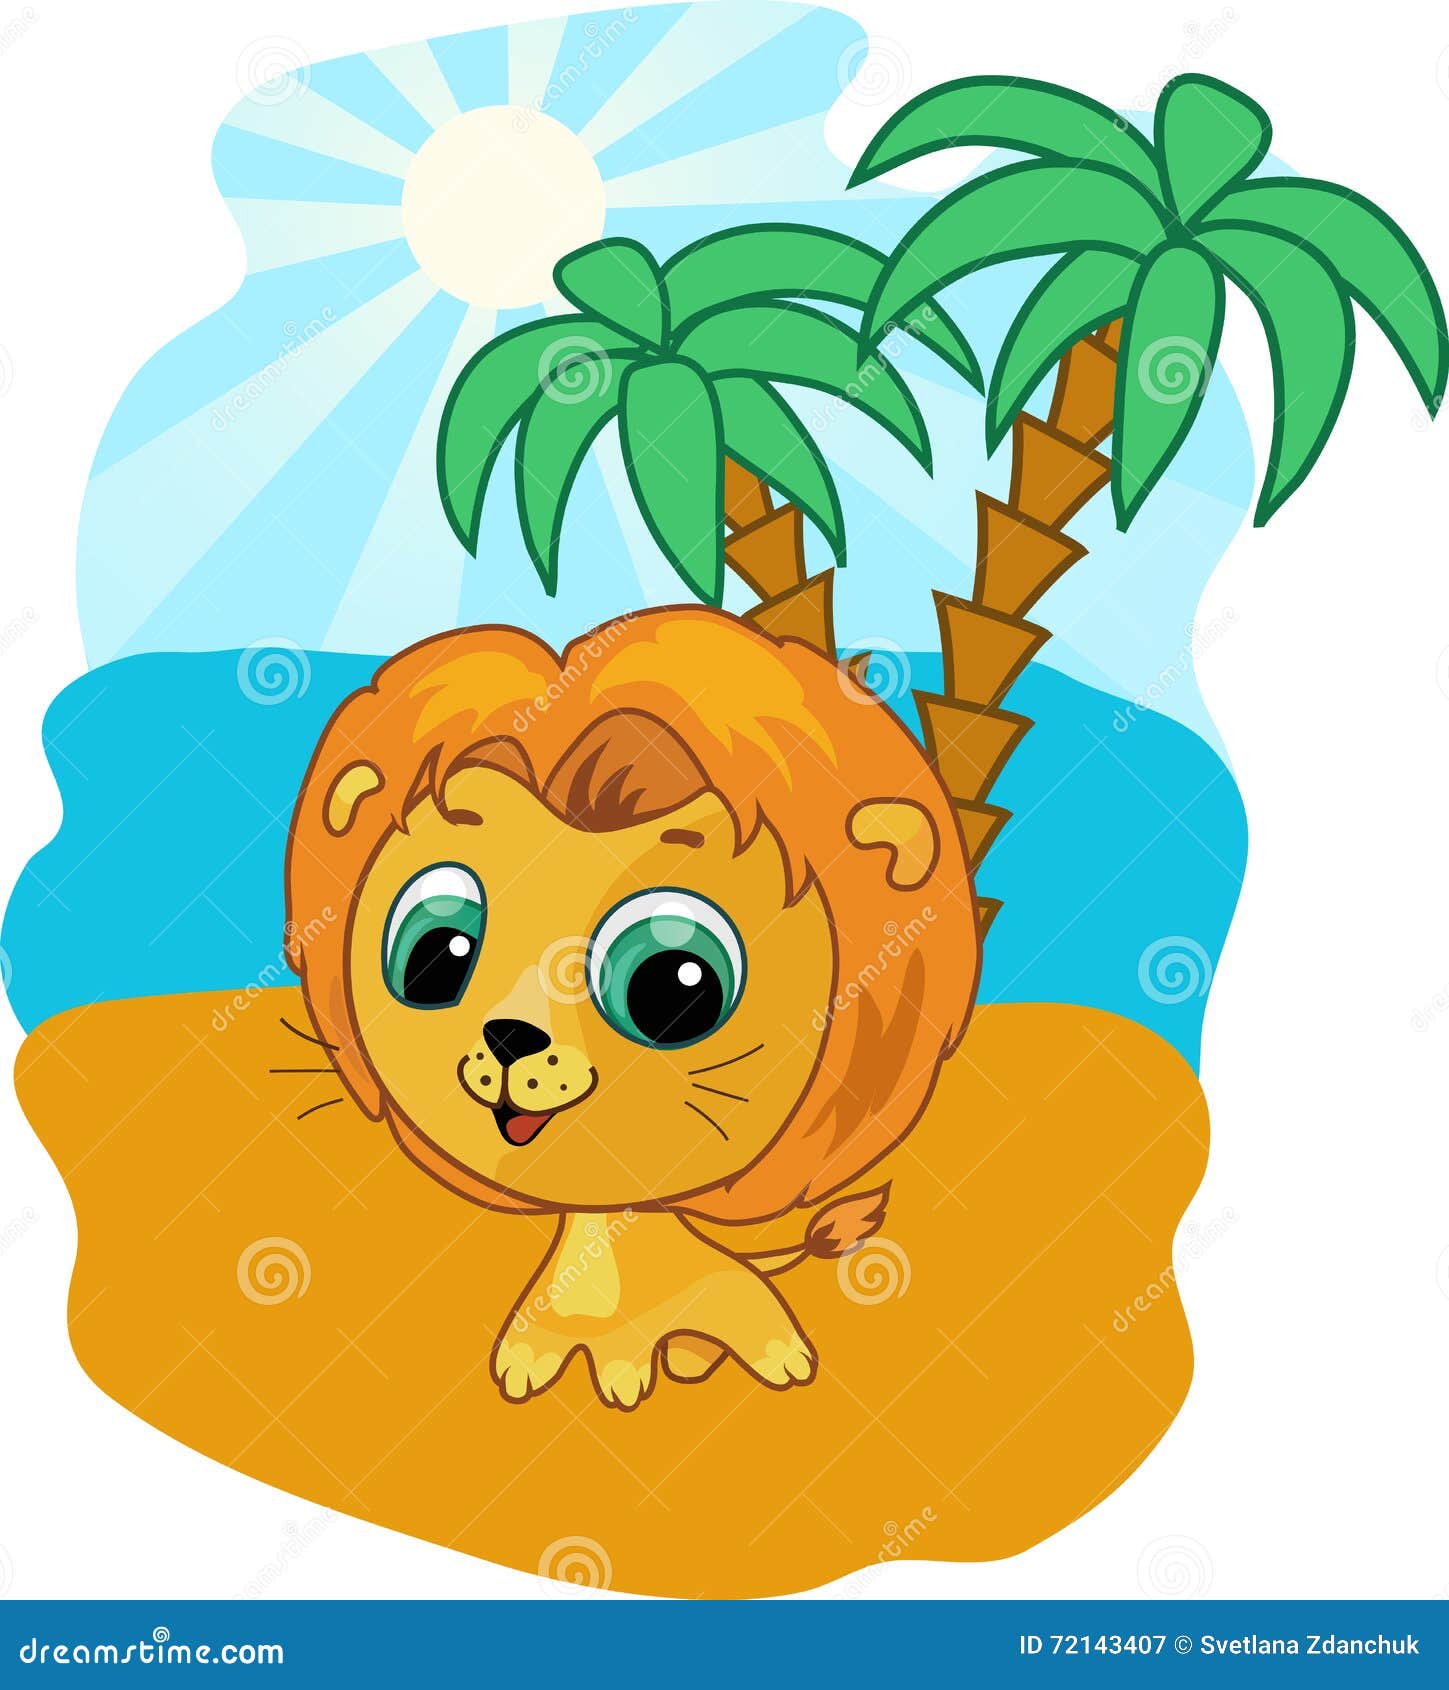 Download Cute Baby Lion Vector Illustration Stock Vector ...